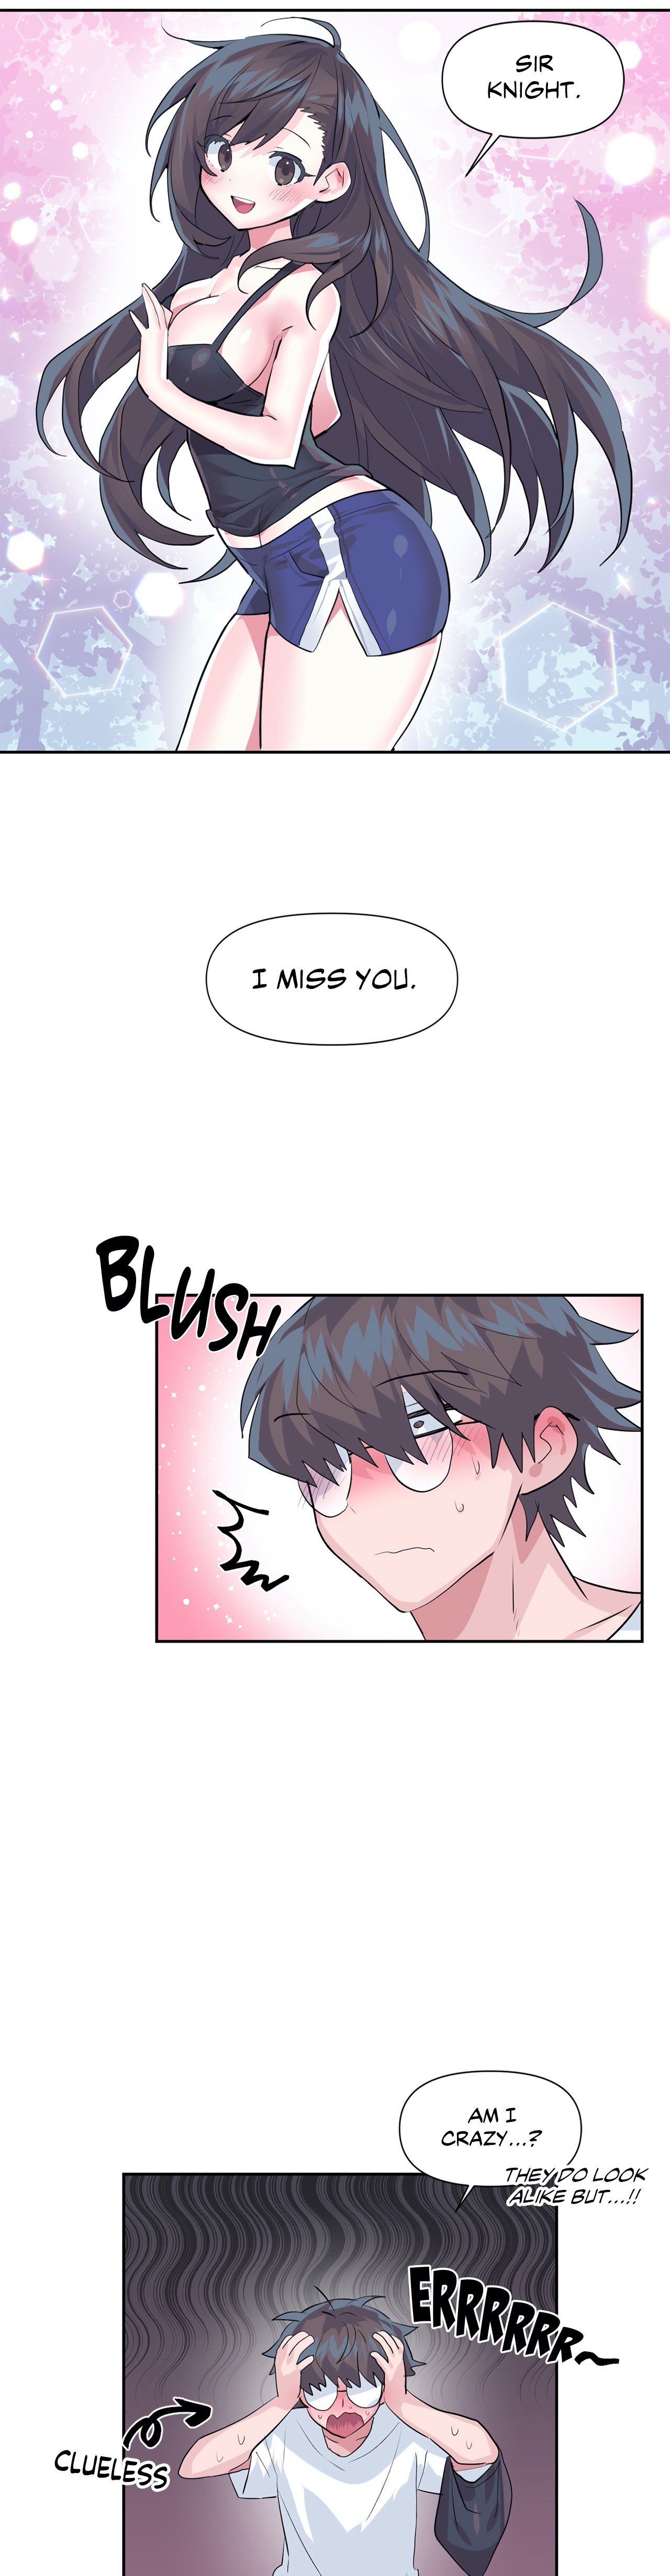 log-in-to-lust-a-land-chap-33-18